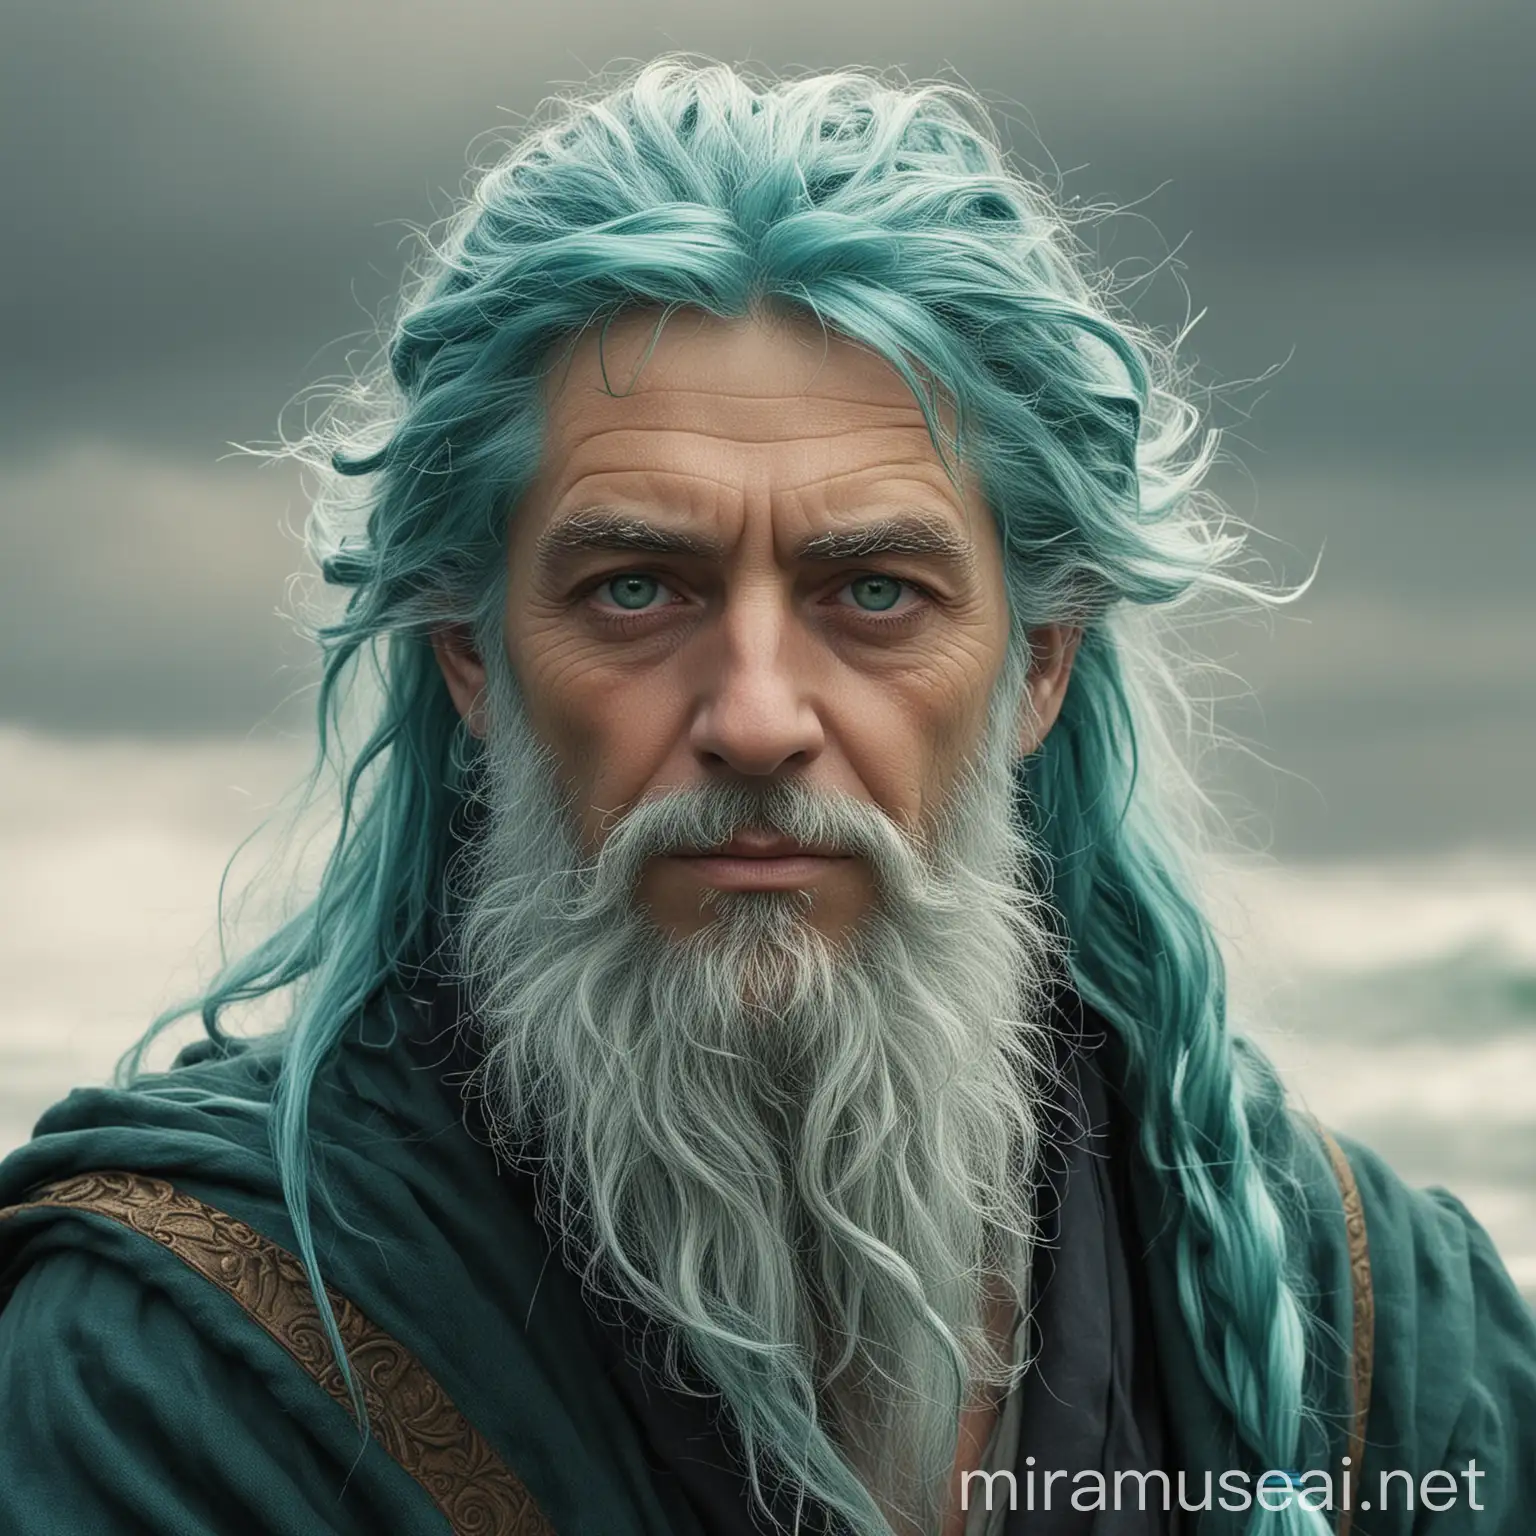  The adult wizard man has a distinguished air about him, with a weathered face that shows the wisdom and experience of his years. His sea-green eyes sparkle with magic and intelligence, hinting at the depths of knowledge he possesses. His blue hair, long and flowing, seems to shimmer like the surface of the ocean on a sunny day. He carries himself with a quiet confidence, exuding a sense of power and mystery that draws others to him.